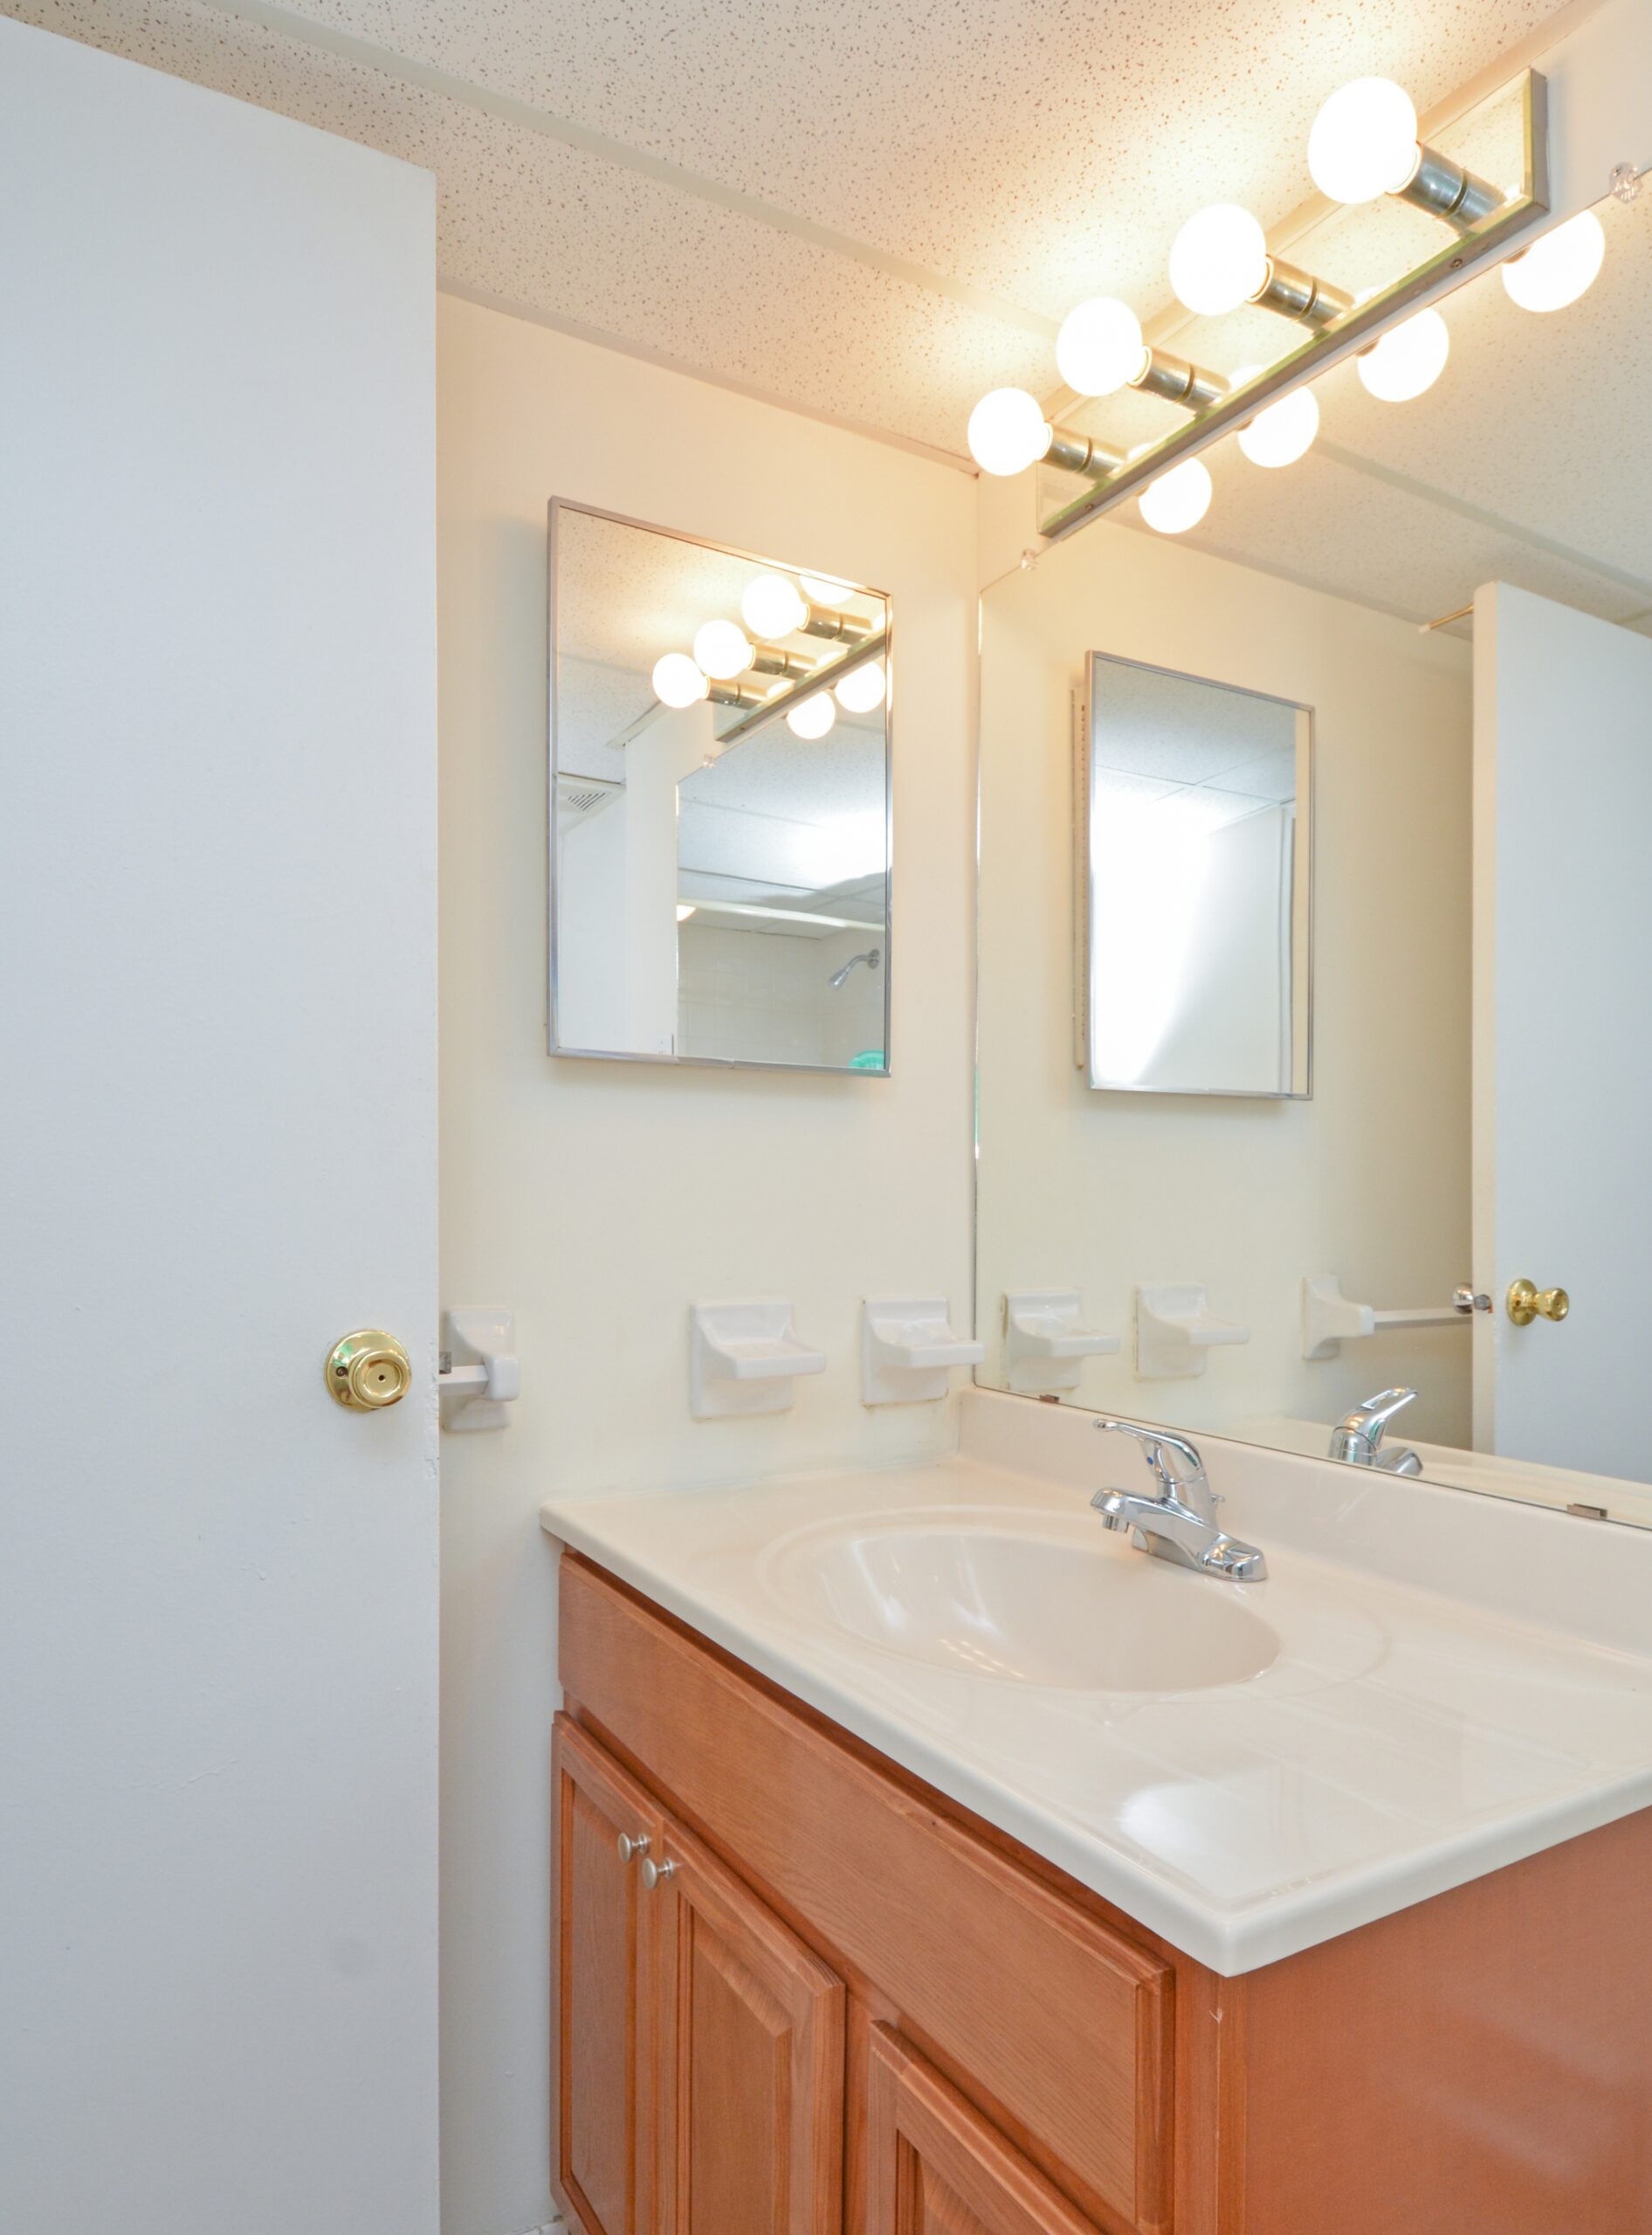 Bathroom with a large mirror in front of the sink, a small side mirror, and vanity lights.